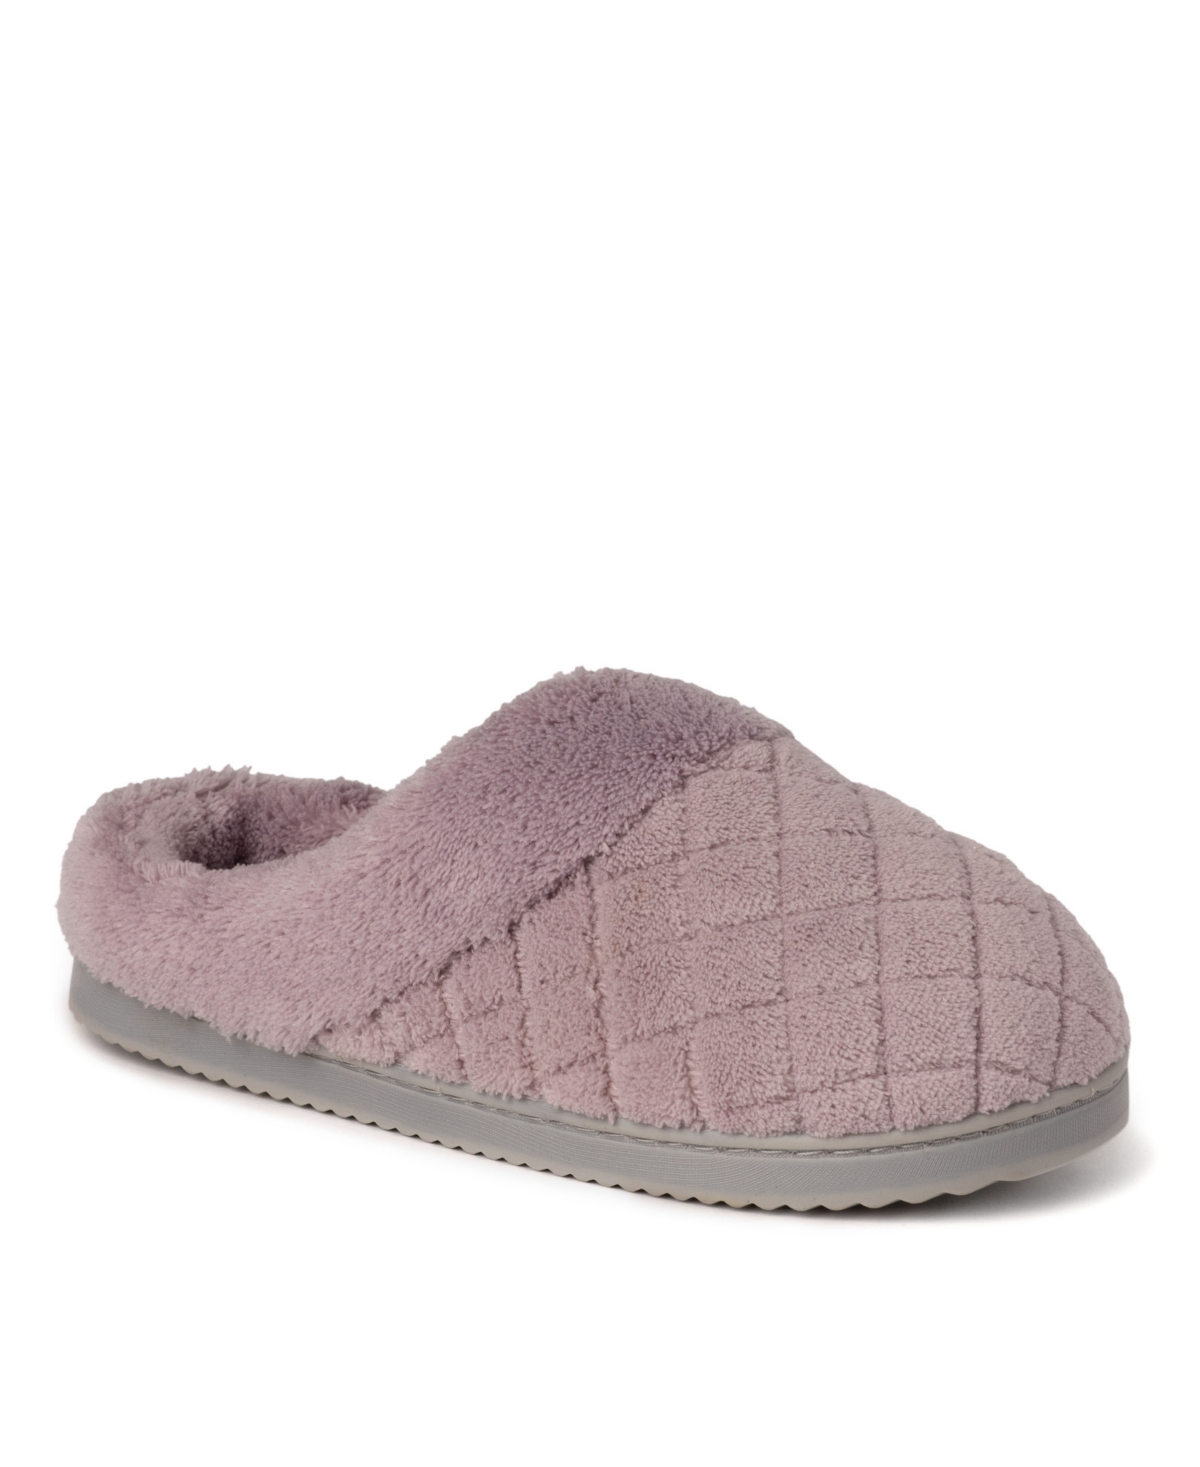 DEARFOAMS WOMEN'S LIBBY QUILTED TERRY CLOG SLIPPERS